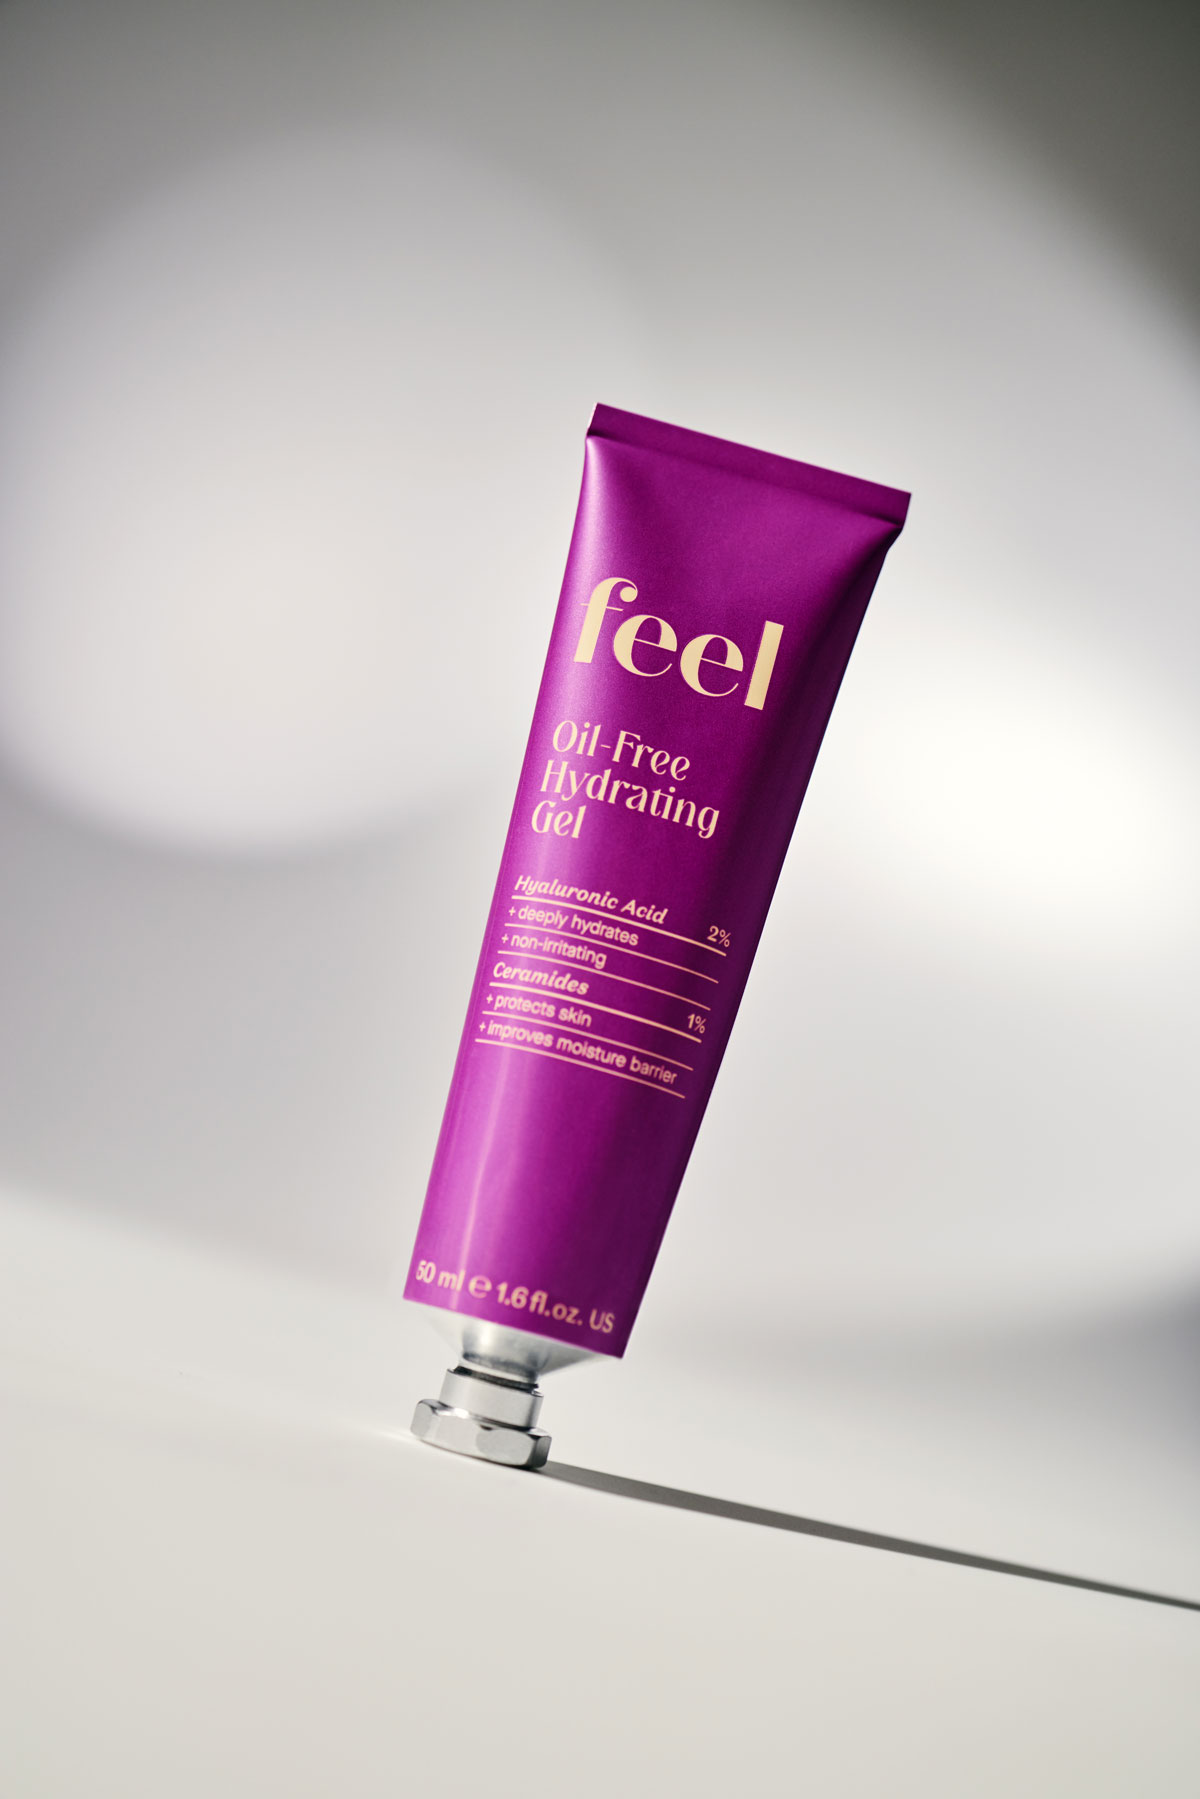 Metallic magenta coloured aluminum tube that says "Oil-Free Hydrating Gel" in flat light yellow text. Flat table plane is set on an angle.